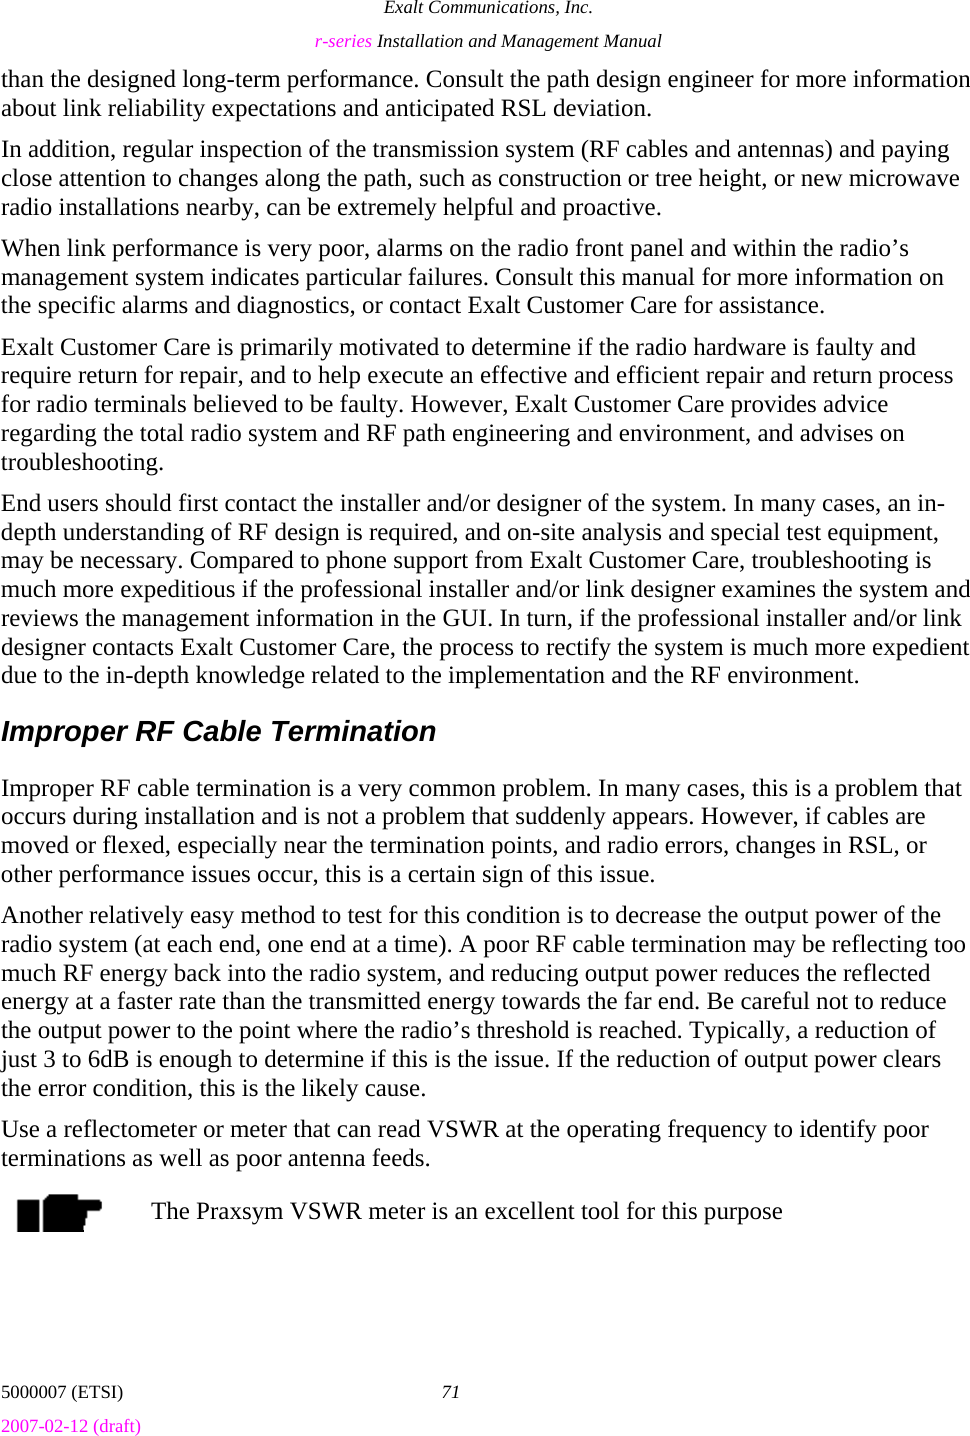 Exalt Communications, Inc. r-series Installation and Management Manual 5000007 (ETSI)  71 2007-02-12 (draft)  than the designed long-term performance. Consult the path design engineer for more information about link reliability expectations and anticipated RSL deviation. In addition, regular inspection of the transmission system (RF cables and antennas) and paying close attention to changes along the path, such as construction or tree height, or new microwave radio installations nearby, can be extremely helpful and proactive. When link performance is very poor, alarms on the radio front panel and within the radio’s management system indicates particular failures. Consult this manual for more information on the specific alarms and diagnostics, or contact Exalt Customer Care for assistance.  Exalt Customer Care is primarily motivated to determine if the radio hardware is faulty and require return for repair, and to help execute an effective and efficient repair and return process for radio terminals believed to be faulty. However, Exalt Customer Care provides advice regarding the total radio system and RF path engineering and environment, and advises on troubleshooting.  End users should first contact the installer and/or designer of the system. In many cases, an in-depth understanding of RF design is required, and on-site analysis and special test equipment, may be necessary. Compared to phone support from Exalt Customer Care, troubleshooting is much more expeditious if the professional installer and/or link designer examines the system and reviews the management information in the GUI. In turn, if the professional installer and/or link designer contacts Exalt Customer Care, the process to rectify the system is much more expedient due to the in-depth knowledge related to the implementation and the RF environment. Improper RF Cable Termination Improper RF cable termination is a very common problem. In many cases, this is a problem that occurs during installation and is not a problem that suddenly appears. However, if cables are moved or flexed, especially near the termination points, and radio errors, changes in RSL, or other performance issues occur, this is a certain sign of this issue.  Another relatively easy method to test for this condition is to decrease the output power of the radio system (at each end, one end at a time). A poor RF cable termination may be reflecting too much RF energy back into the radio system, and reducing output power reduces the reflected energy at a faster rate than the transmitted energy towards the far end. Be careful not to reduce the output power to the point where the radio’s threshold is reached. Typically, a reduction of just 3 to 6dB is enough to determine if this is the issue. If the reduction of output power clears the error condition, this is the likely cause. Use a reflectometer or meter that can read VSWR at the operating frequency to identify poor terminations as well as poor antenna feeds. The Praxsym VSWR meter is an excellent tool for this purpose 